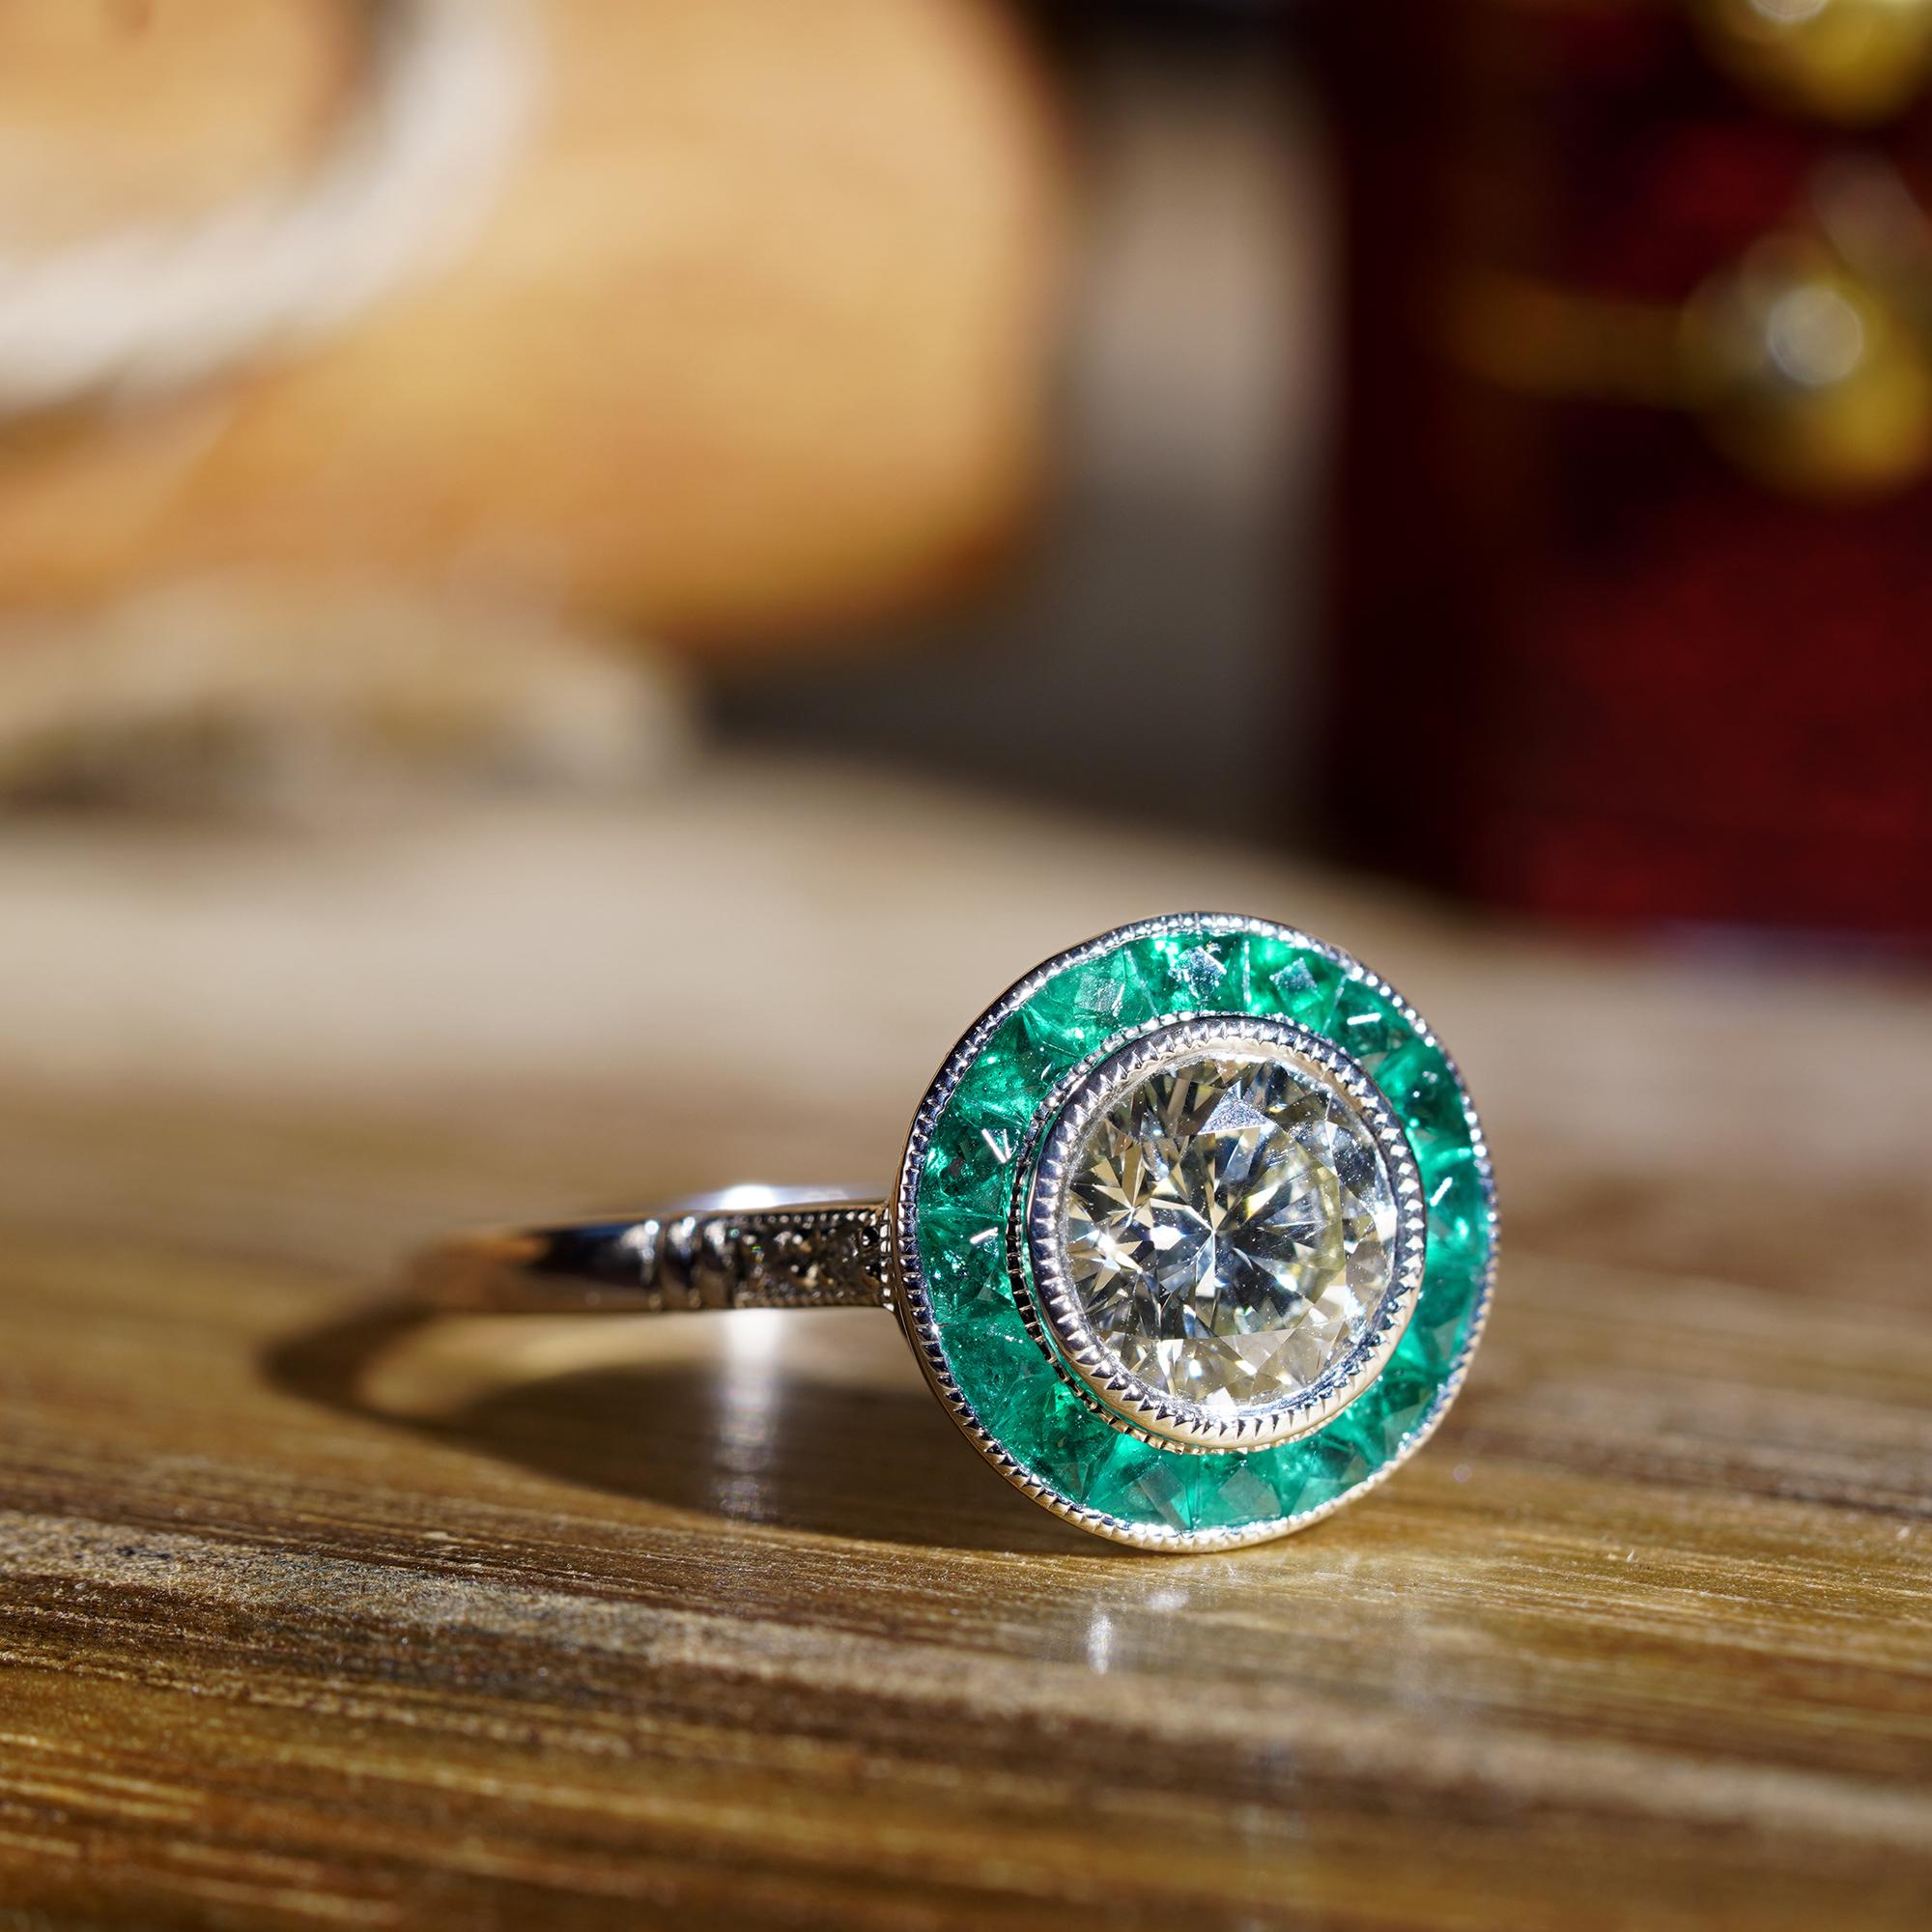 An Art Deco inspired target ring, boasting a central bezel set GIA certified 1 carat diamond with a color of N and clarity of VVS1. The central diamond is surrounded by a halo of channel set French cut emeralds. The round diamonds on shoulders add